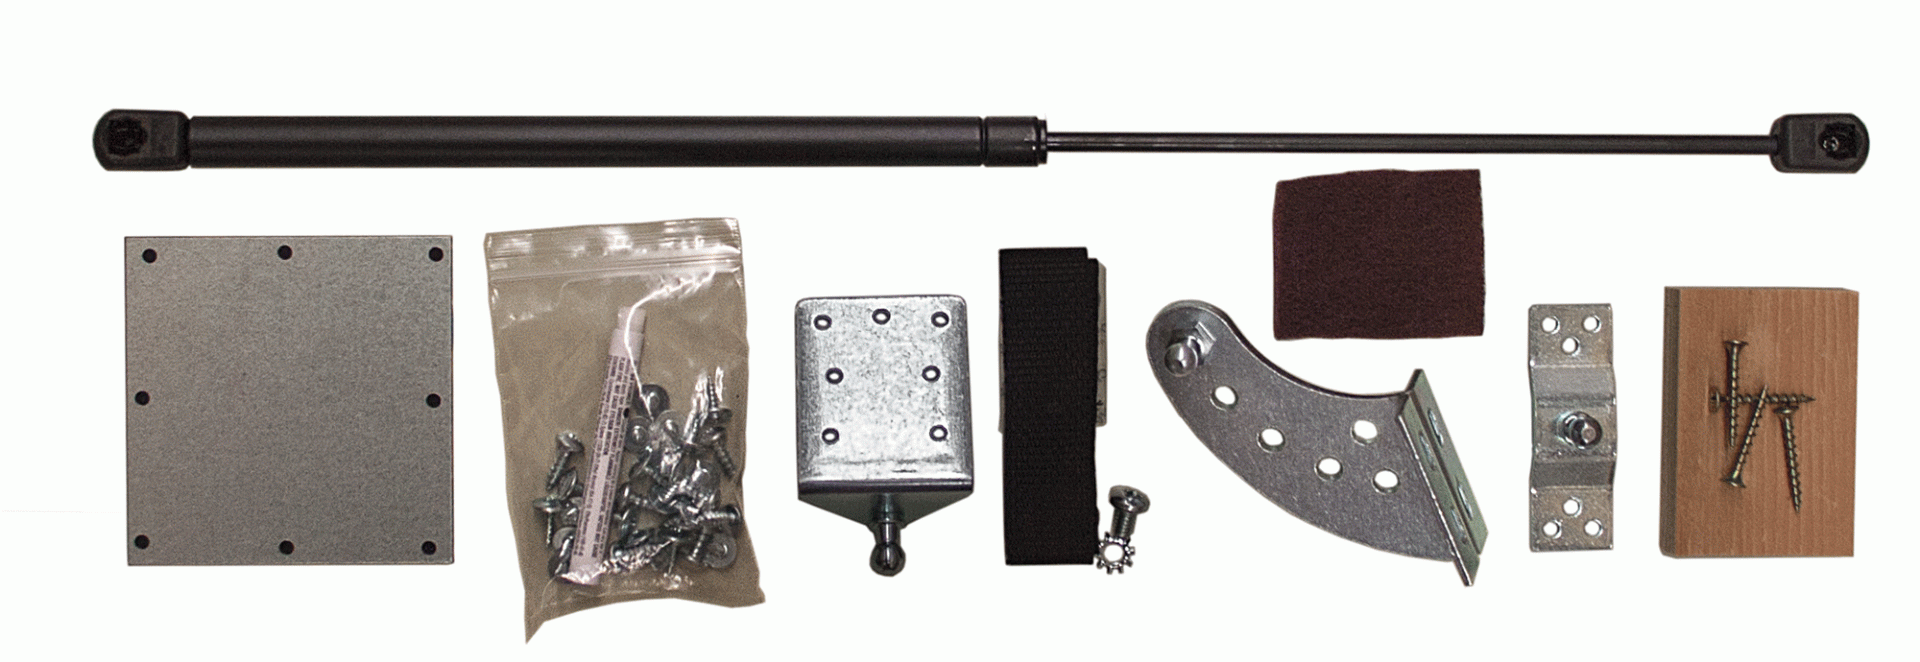 Hatchlift Products LLC | HLK-MED-S | Hydraulic Gas Spring Kit Medium Slideout for RV Doors 27" to 32" Tall